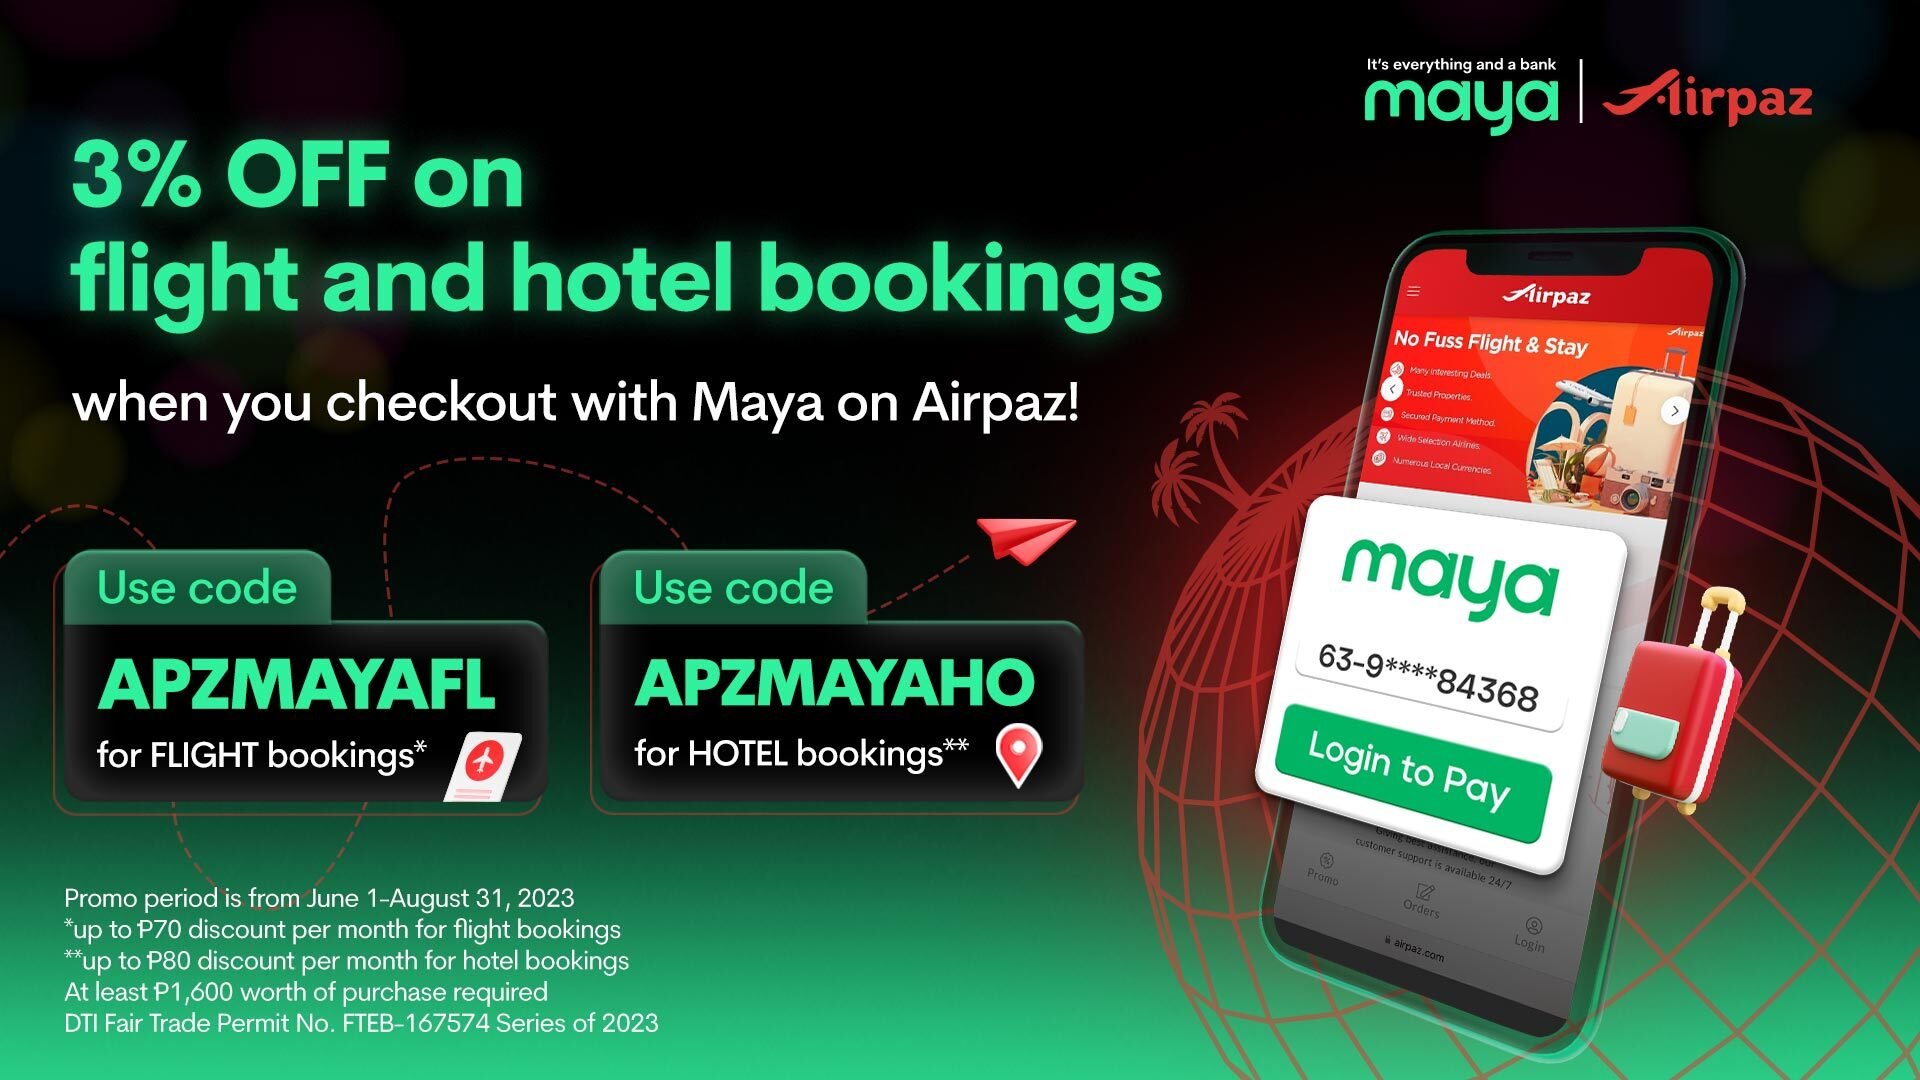 Enjoy 3% OFF when you book on Airpaz using checkout with Maya!